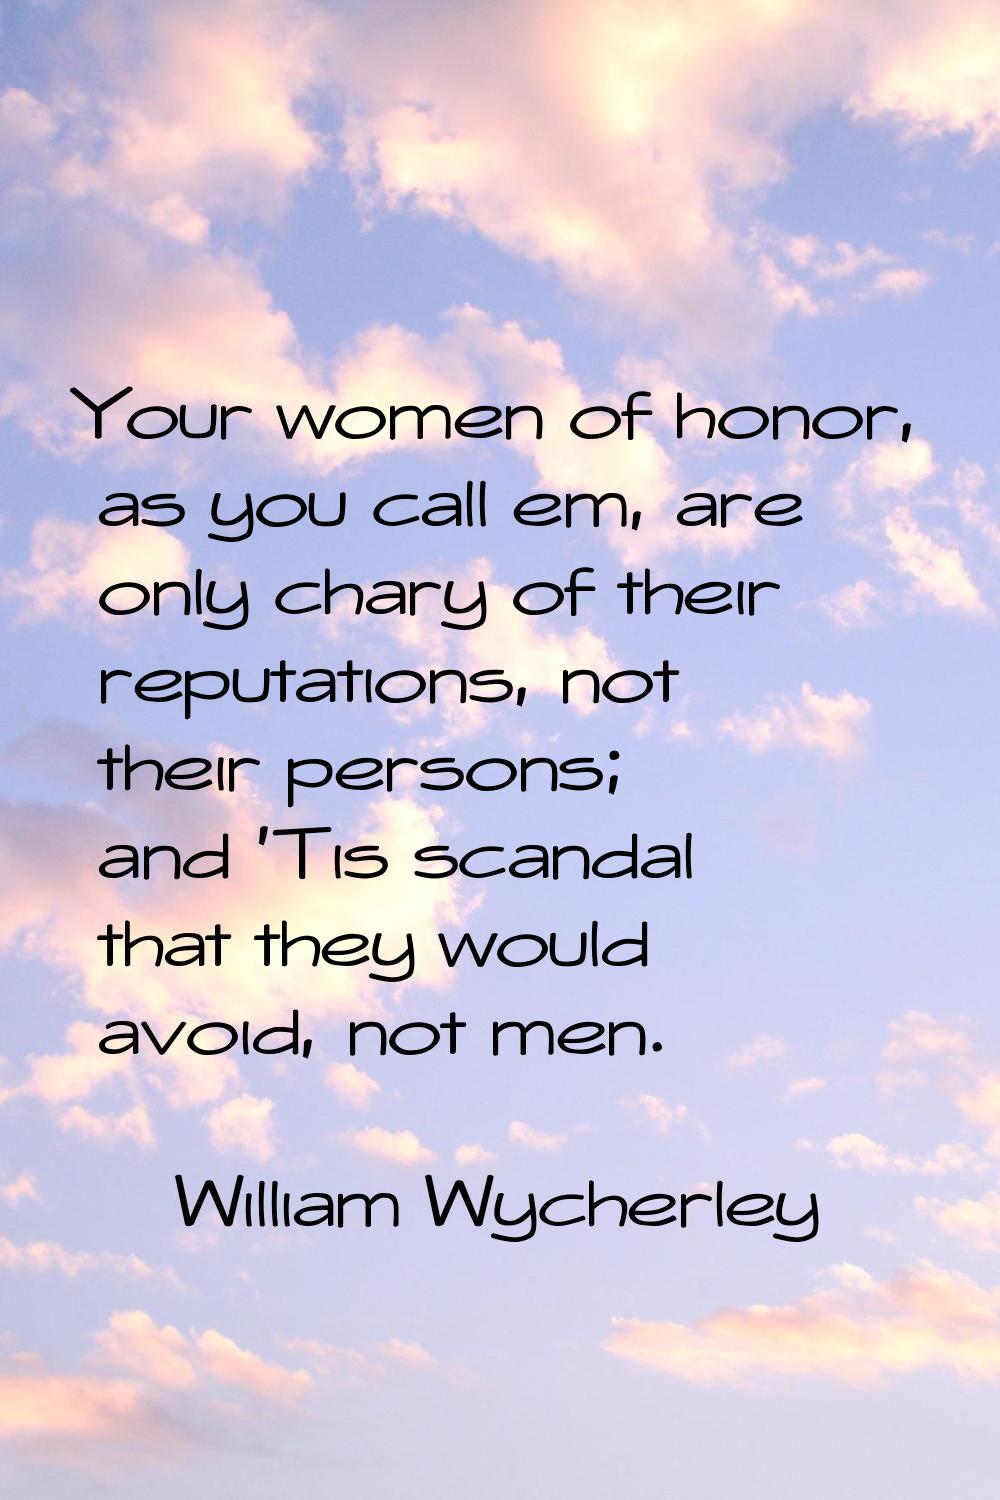 Your women of honor, as you call em, are only chary of their reputations, not their persons; and 'T